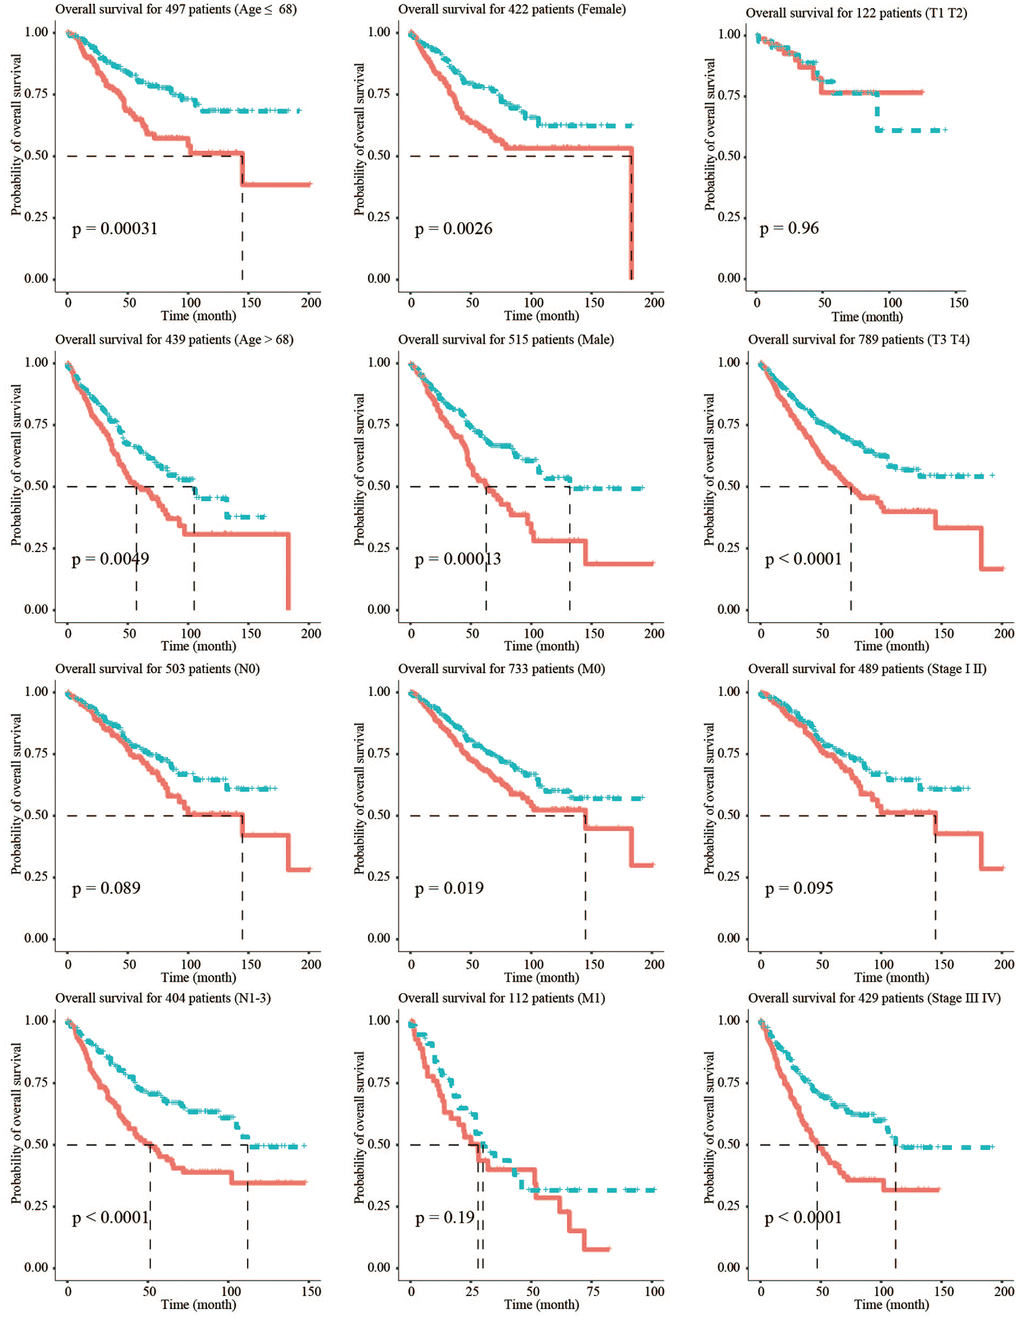 Stratified survival analysis adjusted to age, gender, stage, and TNM stage. All CRC patients in the training and testing groups were summarized in the stratified survival analysis. 68 years old was the median age of 937 CRC patients.